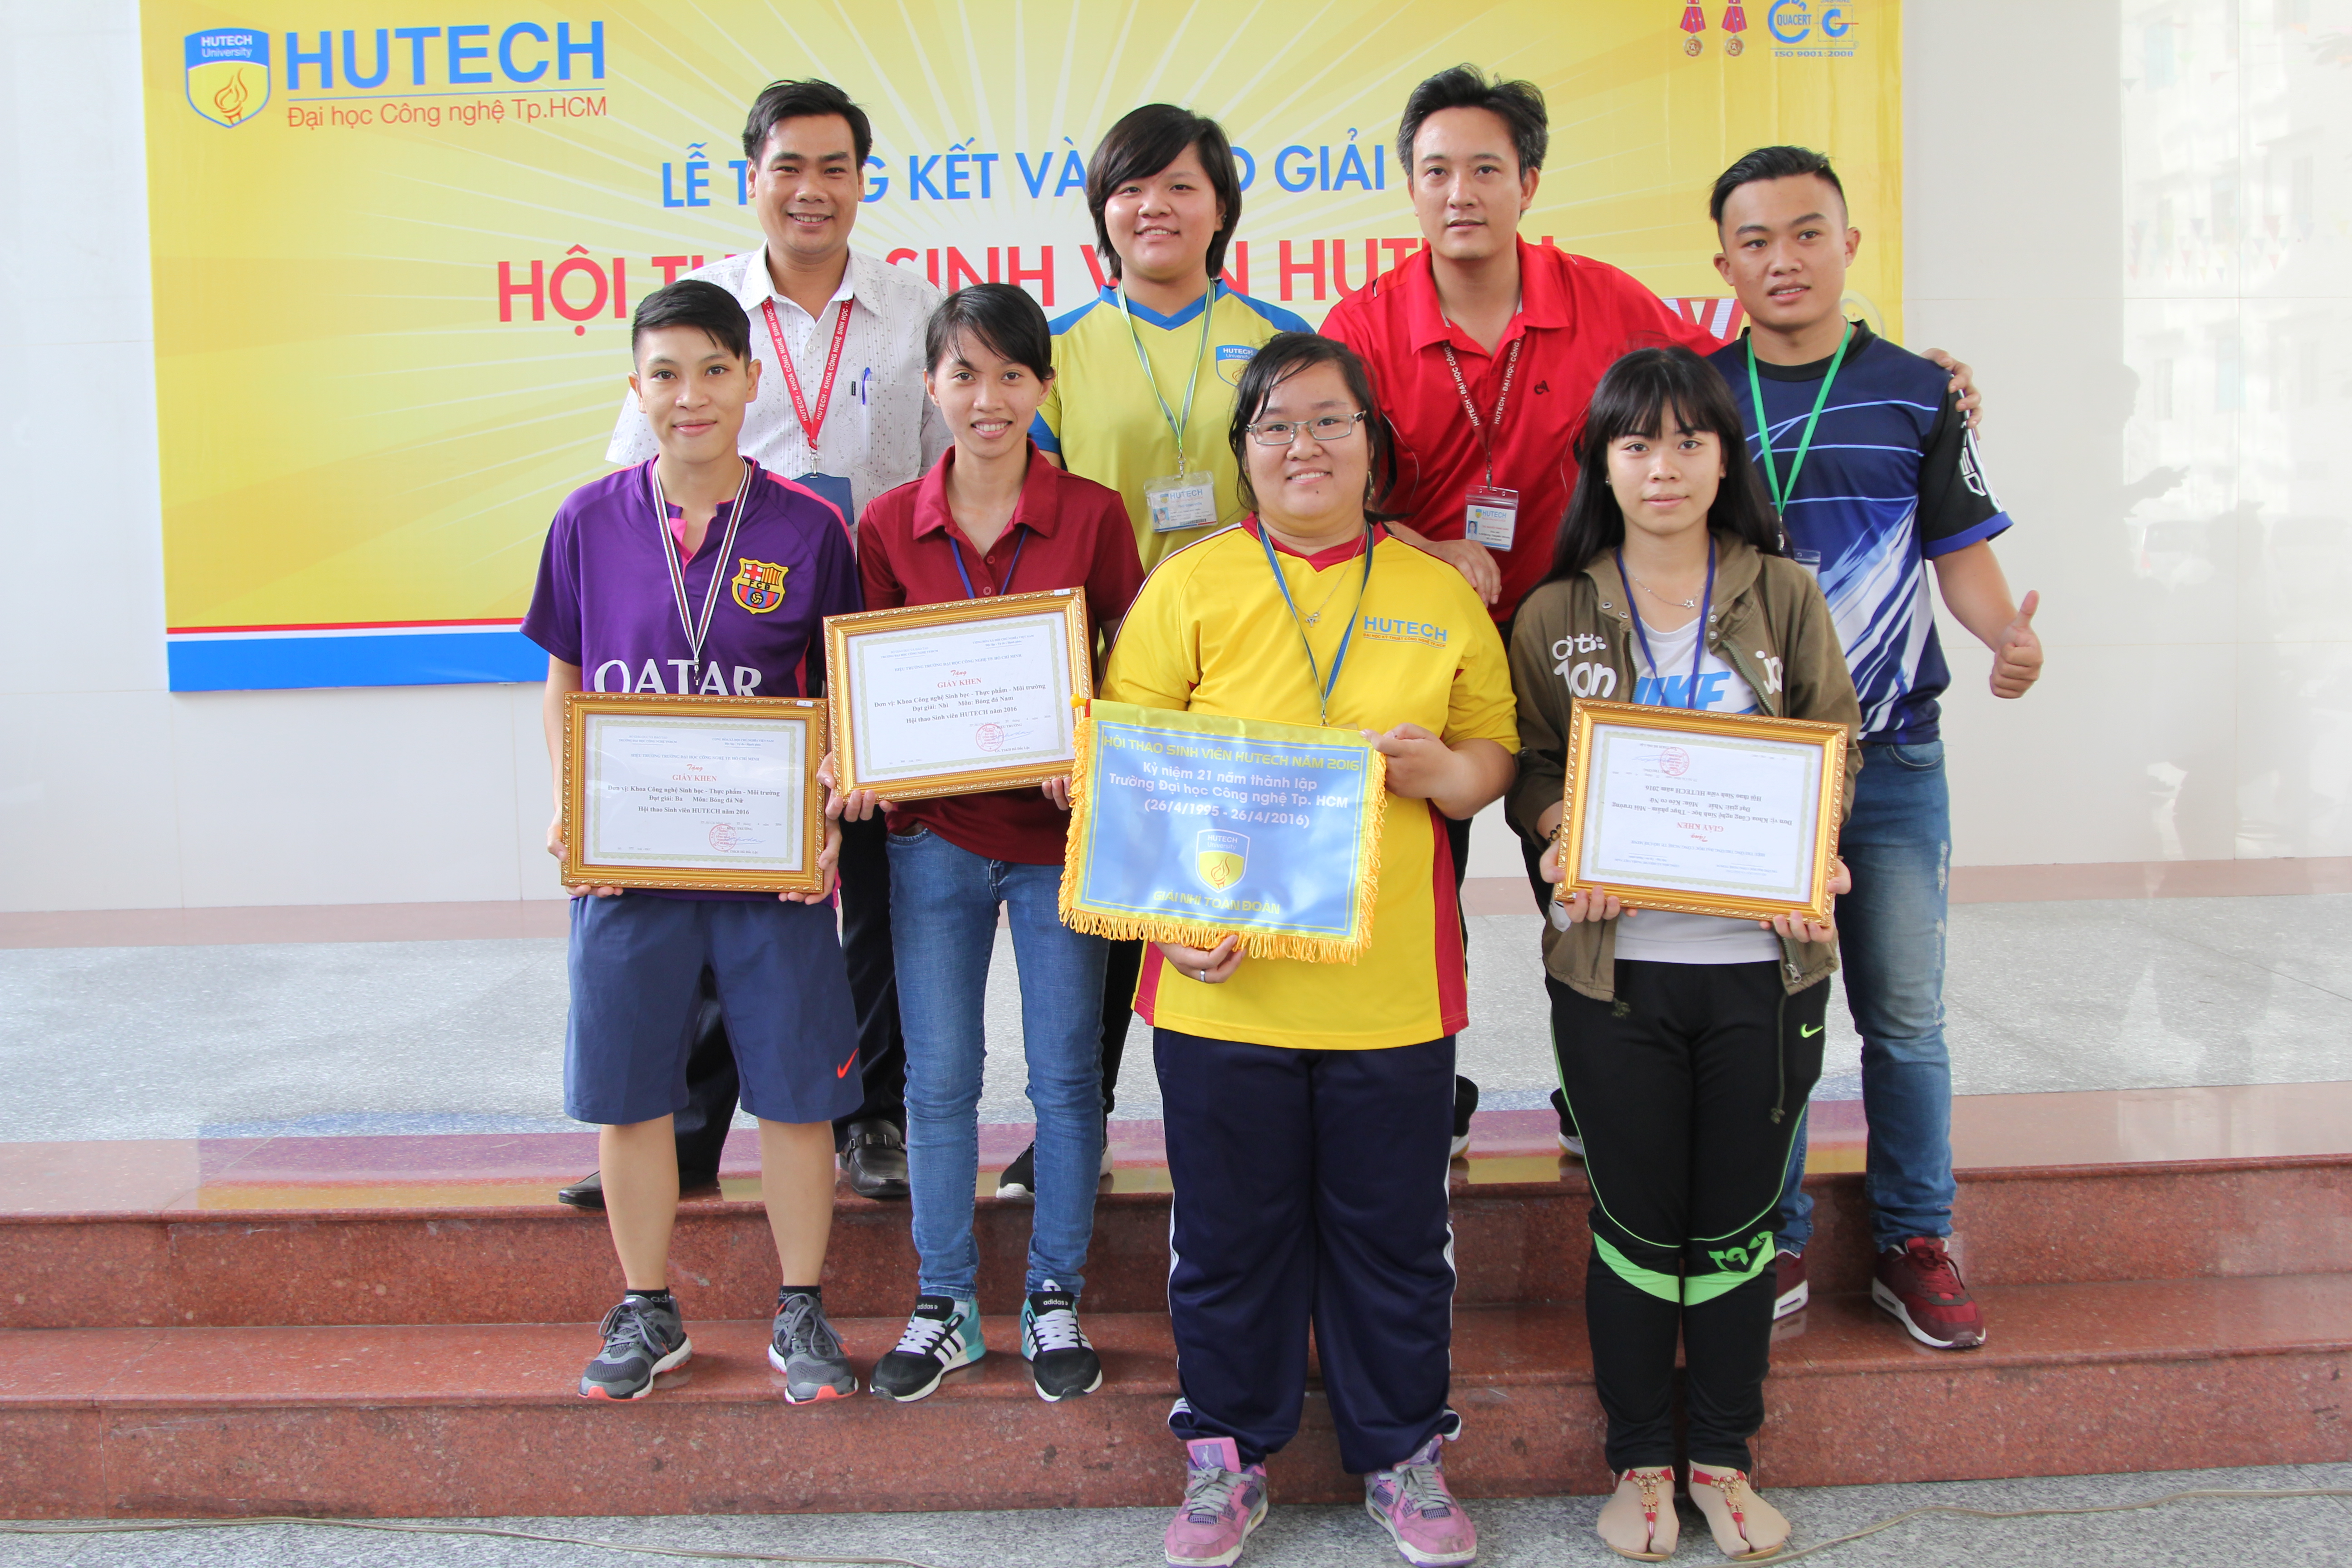 The Faculty of Accounting, Finance and Banking finishes first overall in the 2016 HUTECH Student Sports Fest 56